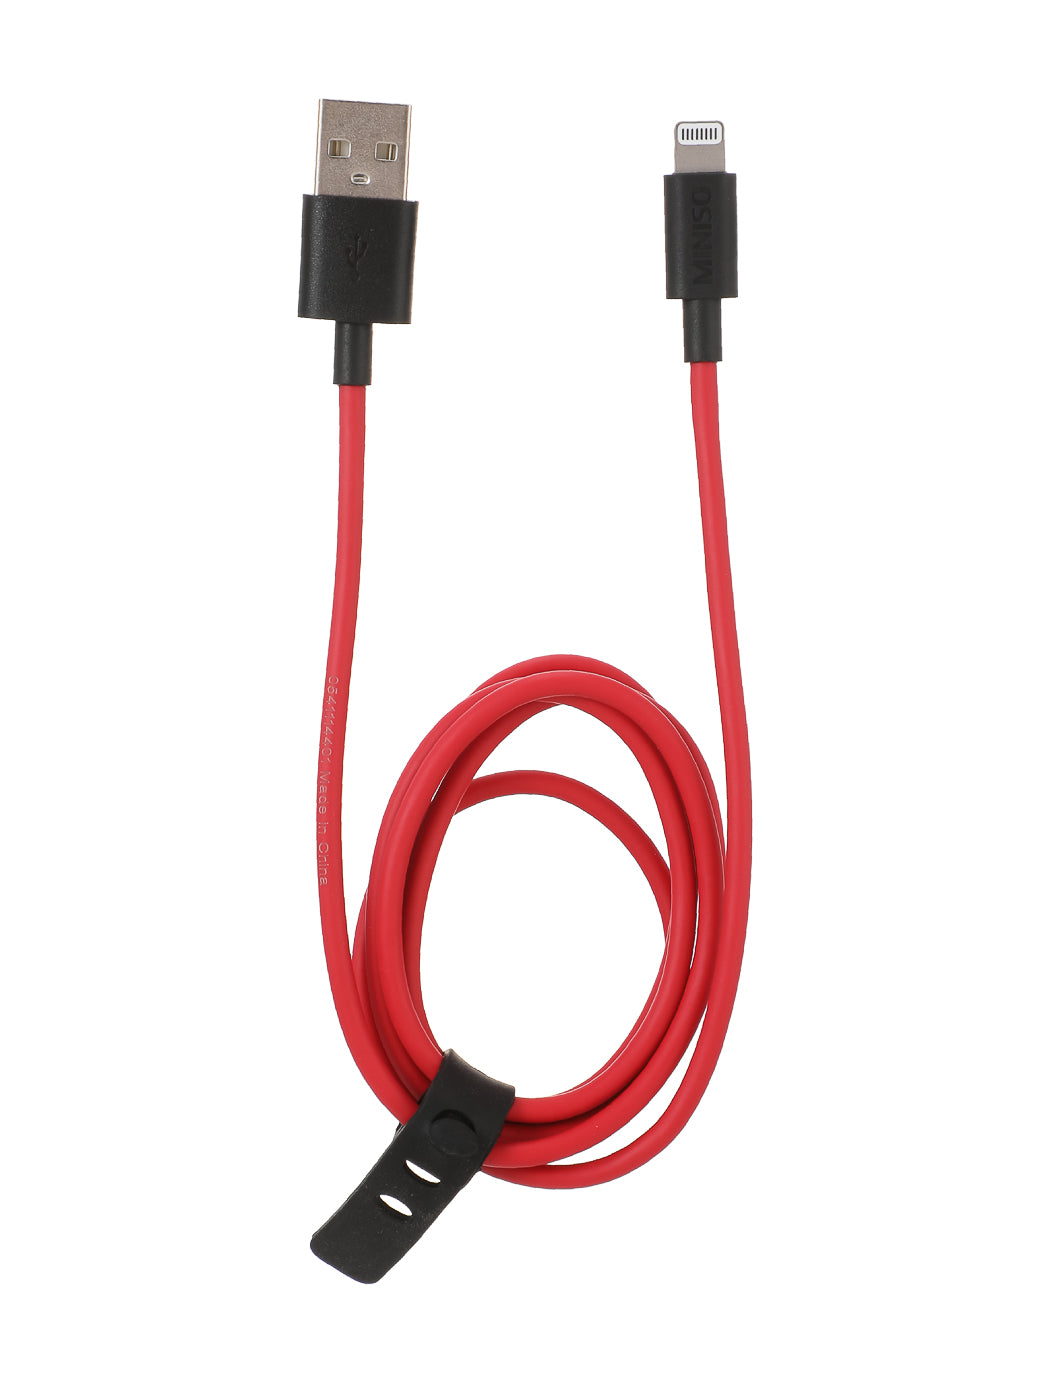 MINISO 1M FAST CHARGE CHARGE & SYNC CABLE WITH LIGHTNING CONNECTOR (RED) 2010251510102 CHARGING CABLE WITH LIGHTNING CONNECTOR